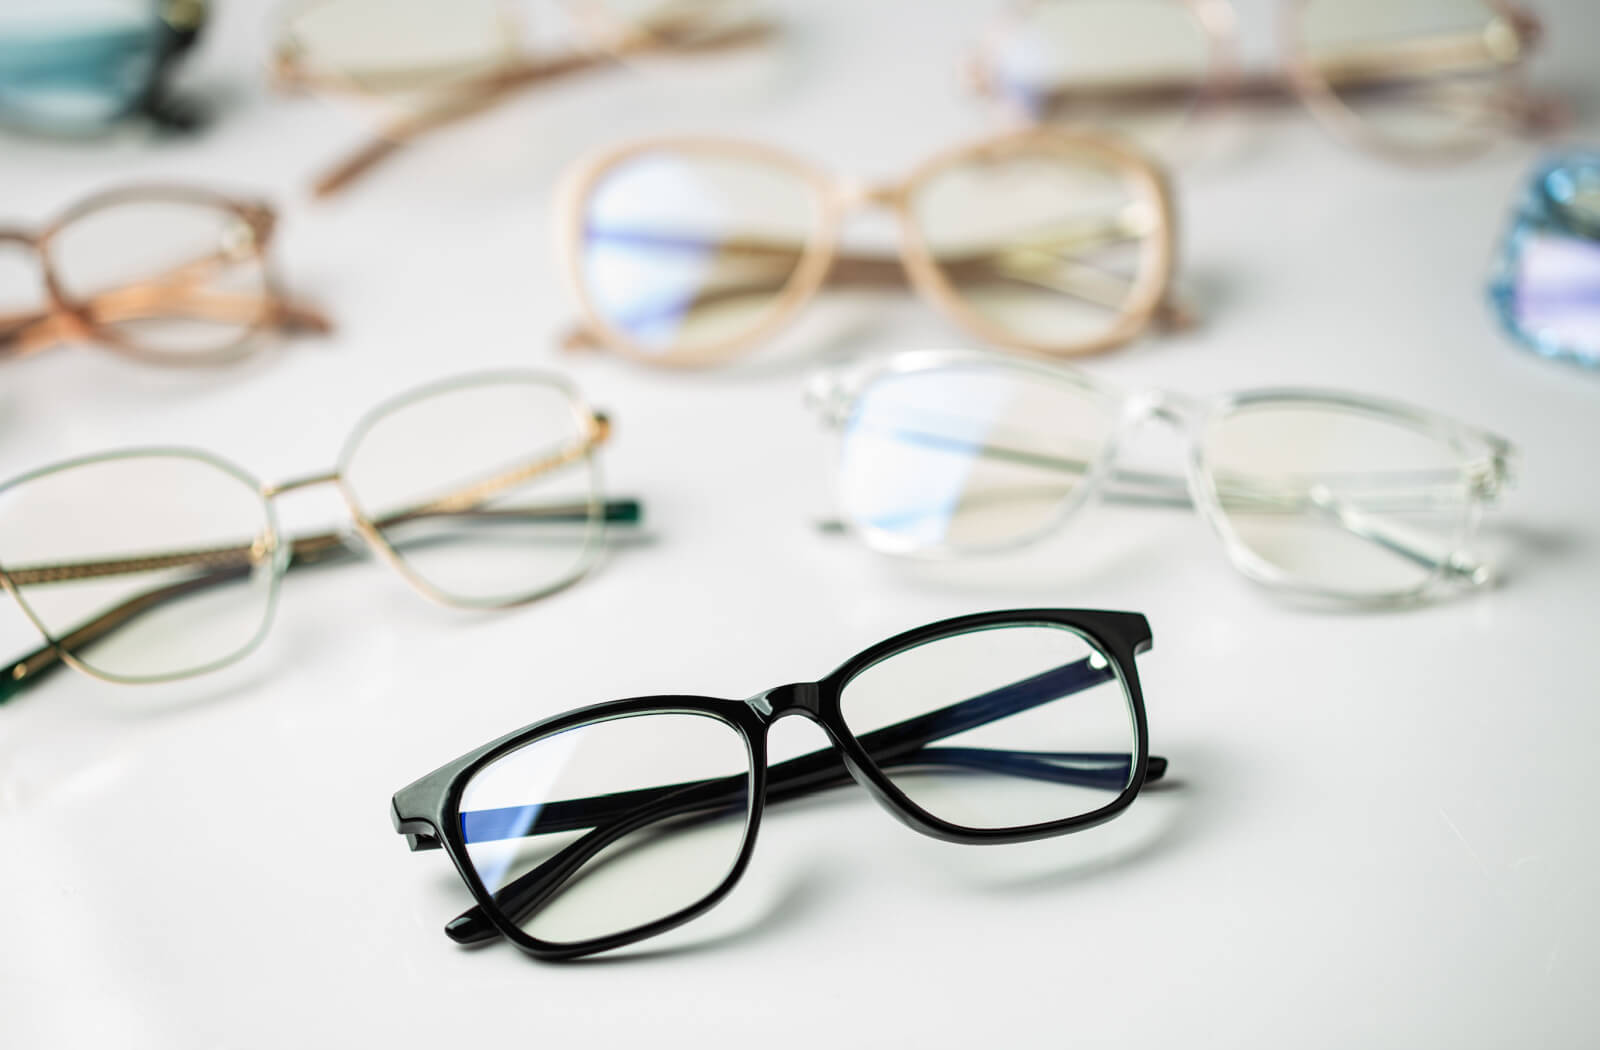 A collection of eyeglasses on a white backdrop.